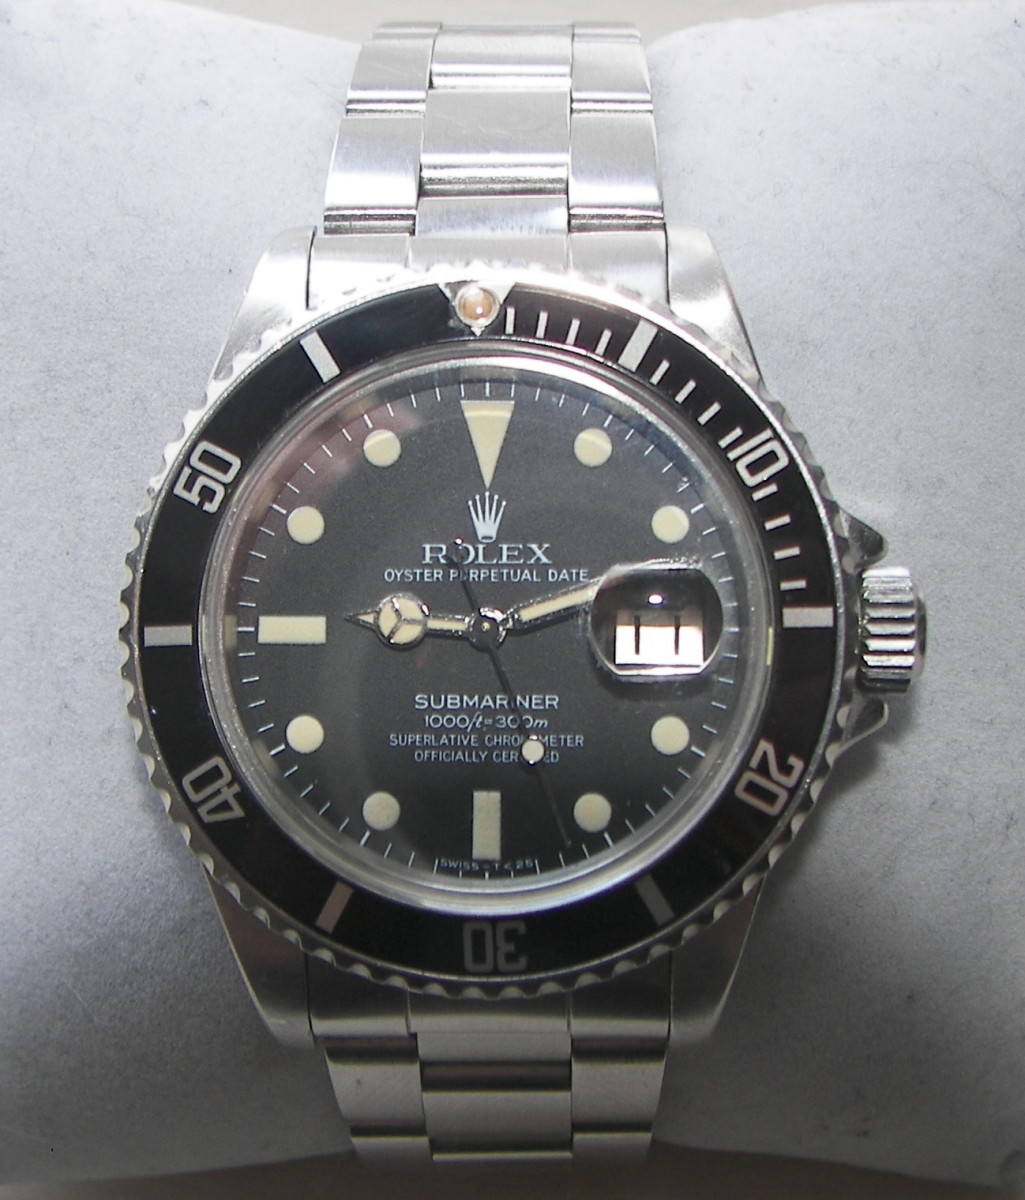 Can I, a Regular Guy, Buy and Wear a Rolex?